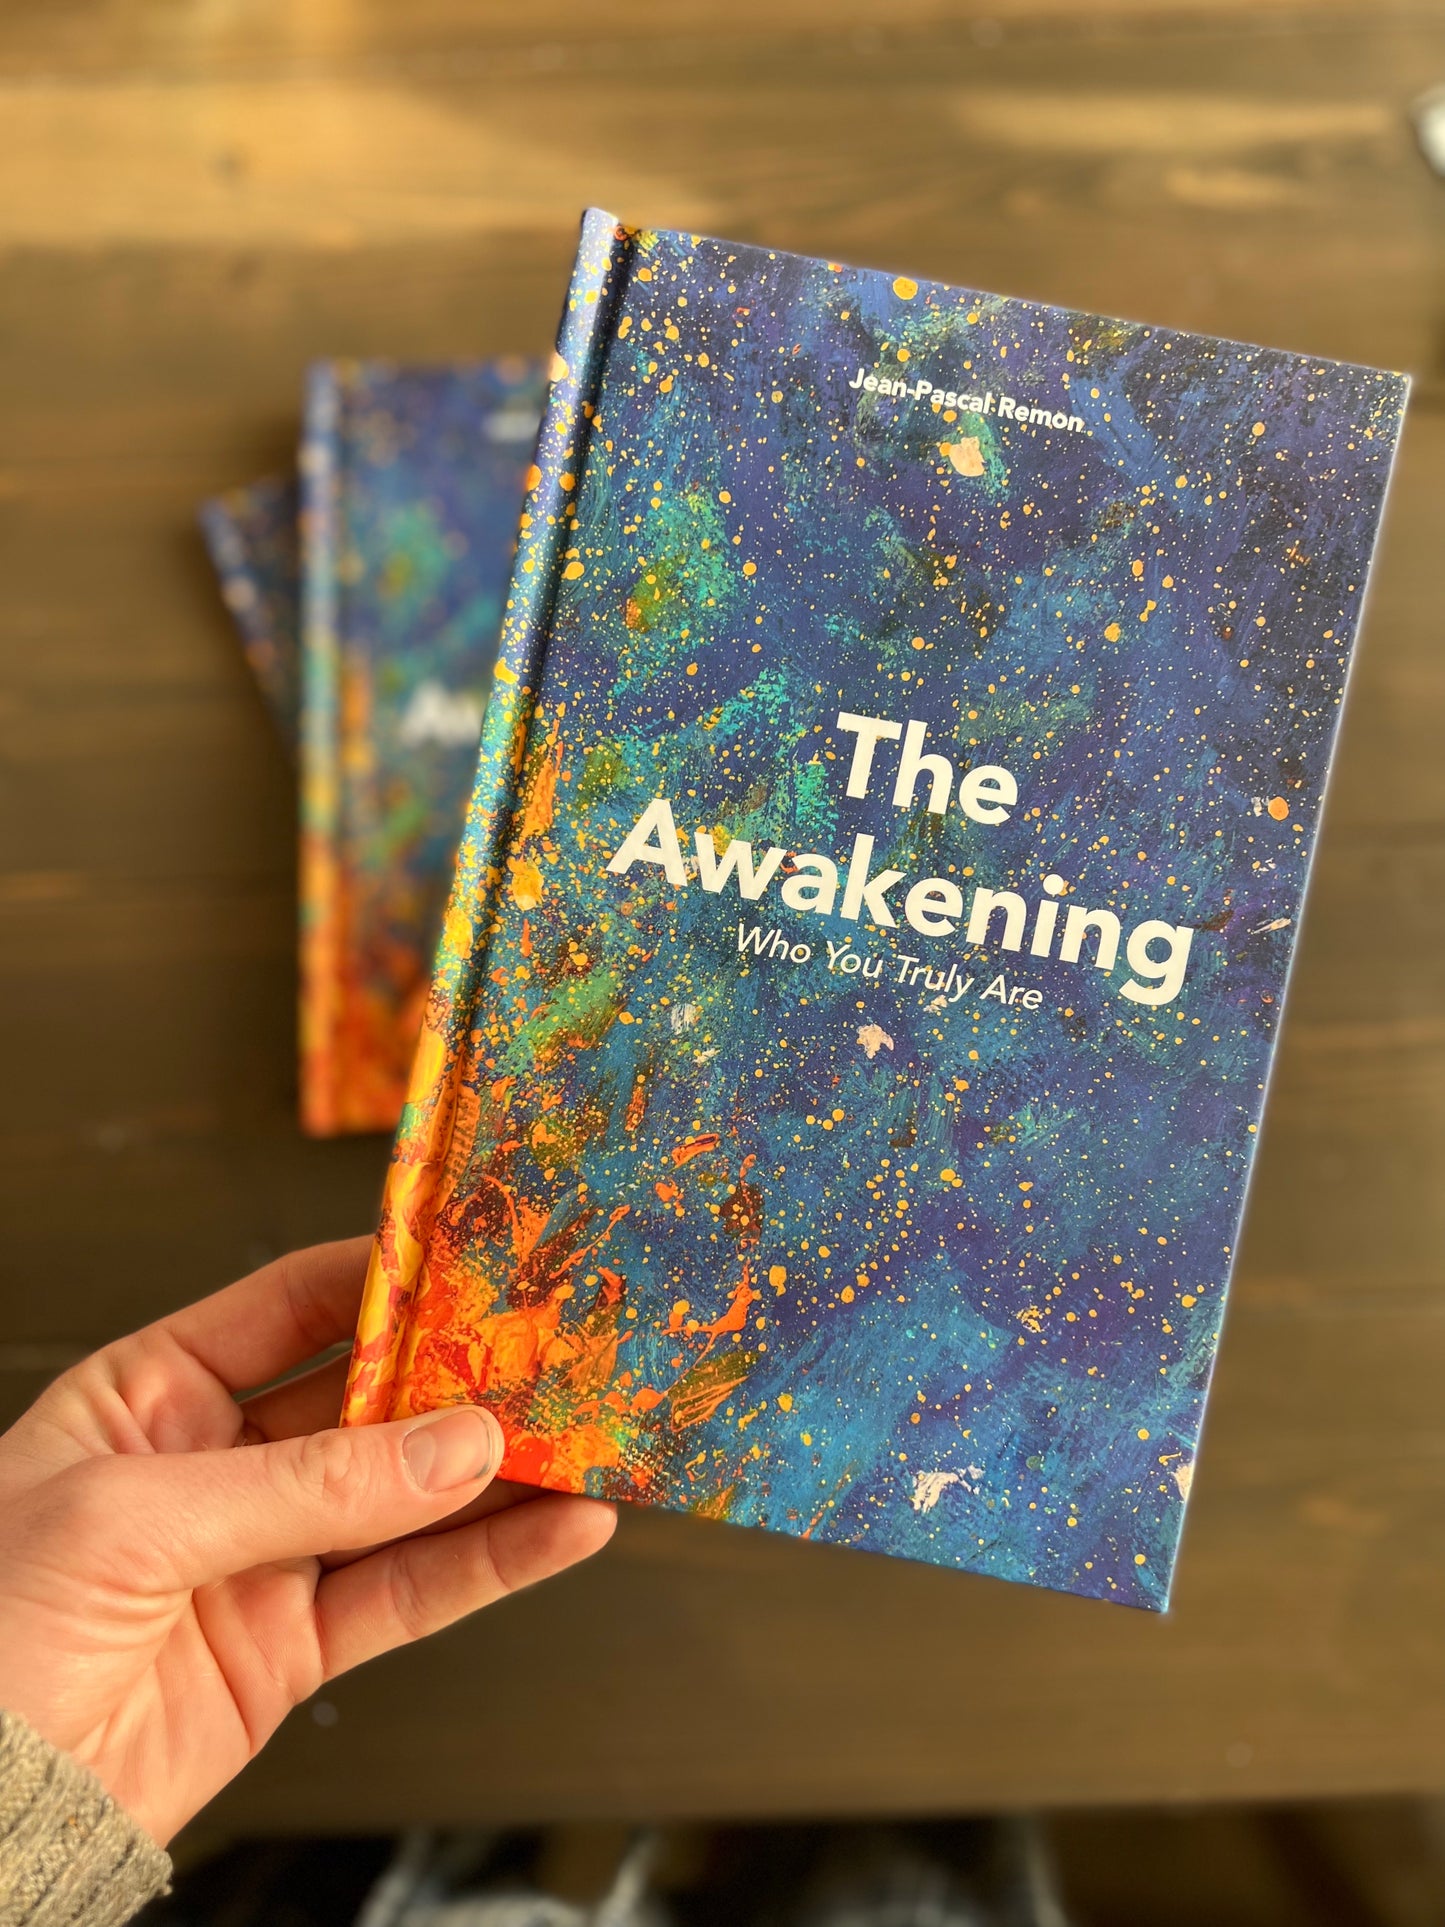 The Awakening: Who You Truly Are